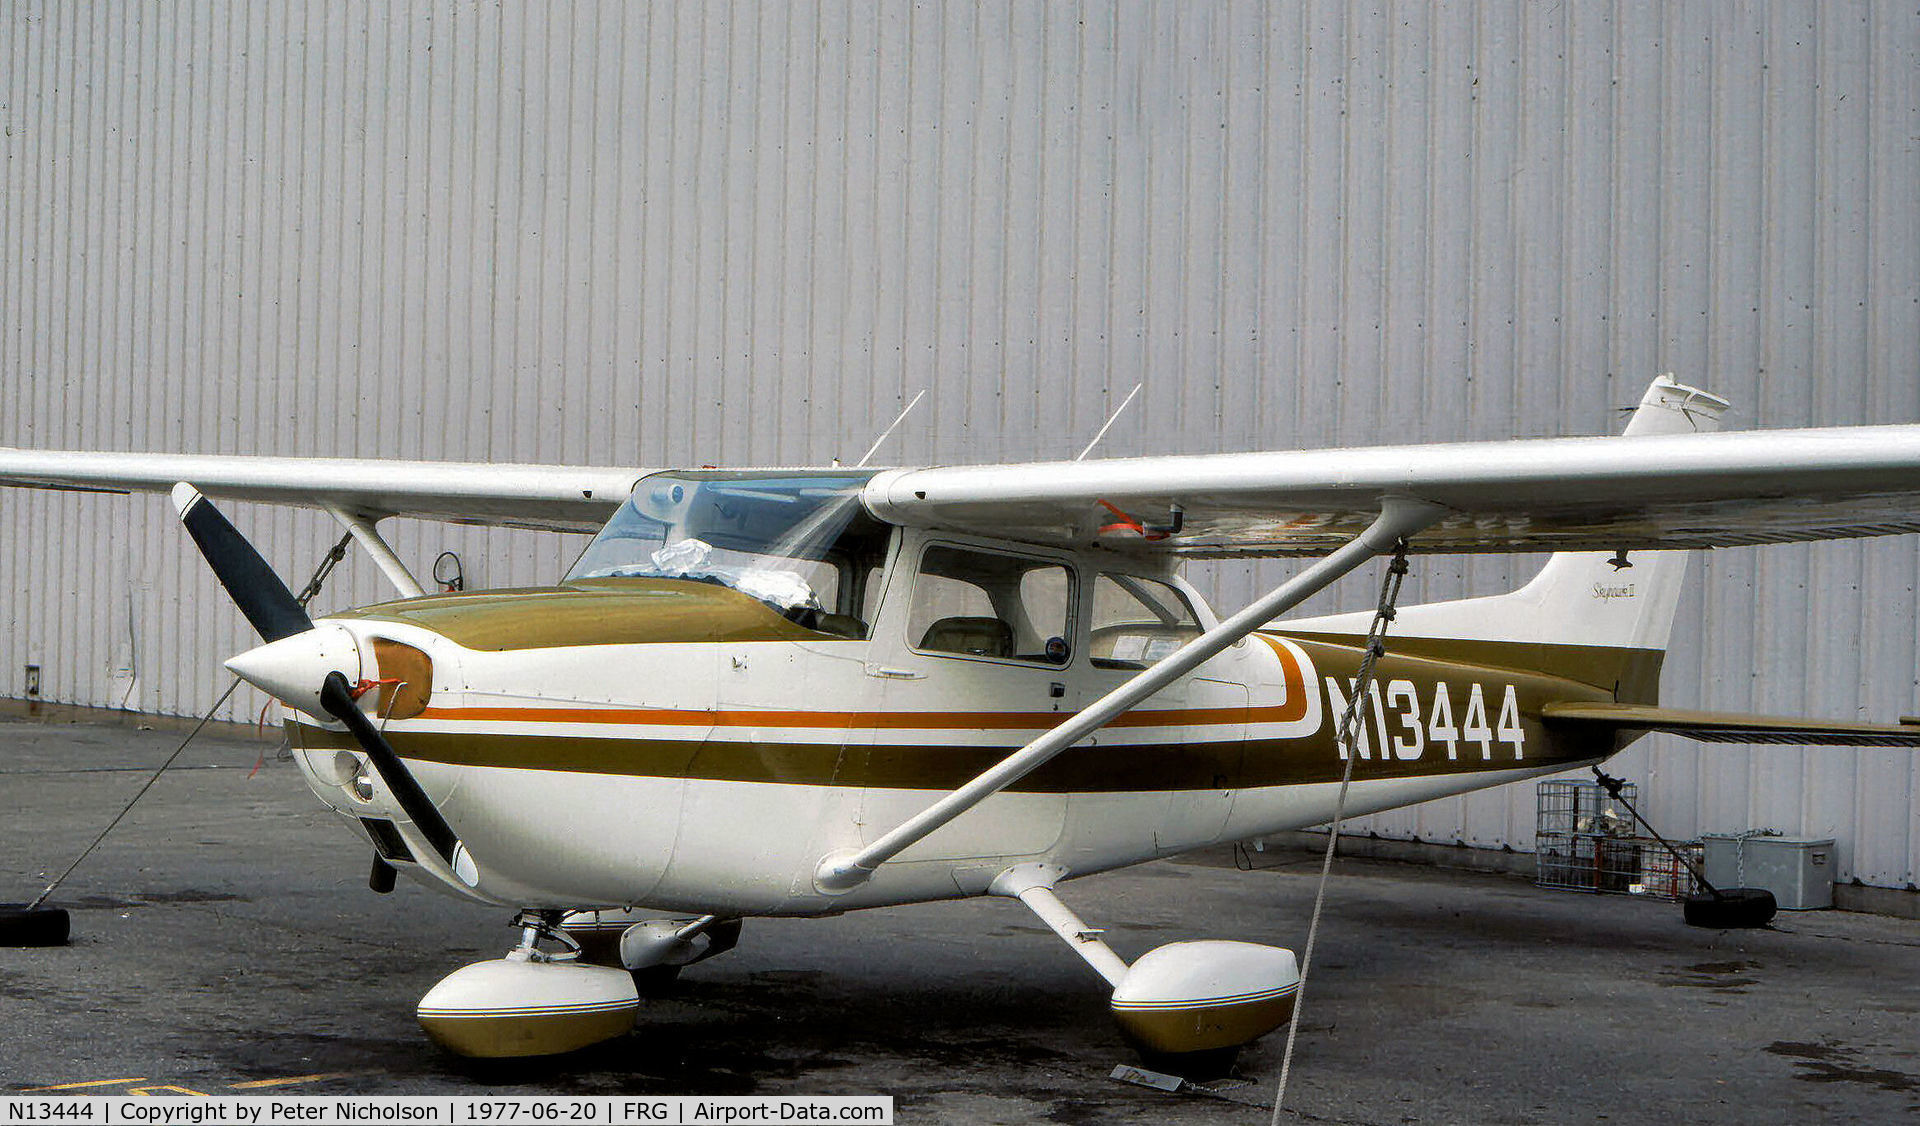 N13444, 1973 Cessna 172M C/N 17262755, Cessna 172M Skyhawk II resident at Republic Airport on Long Island in the Summer of 1977.